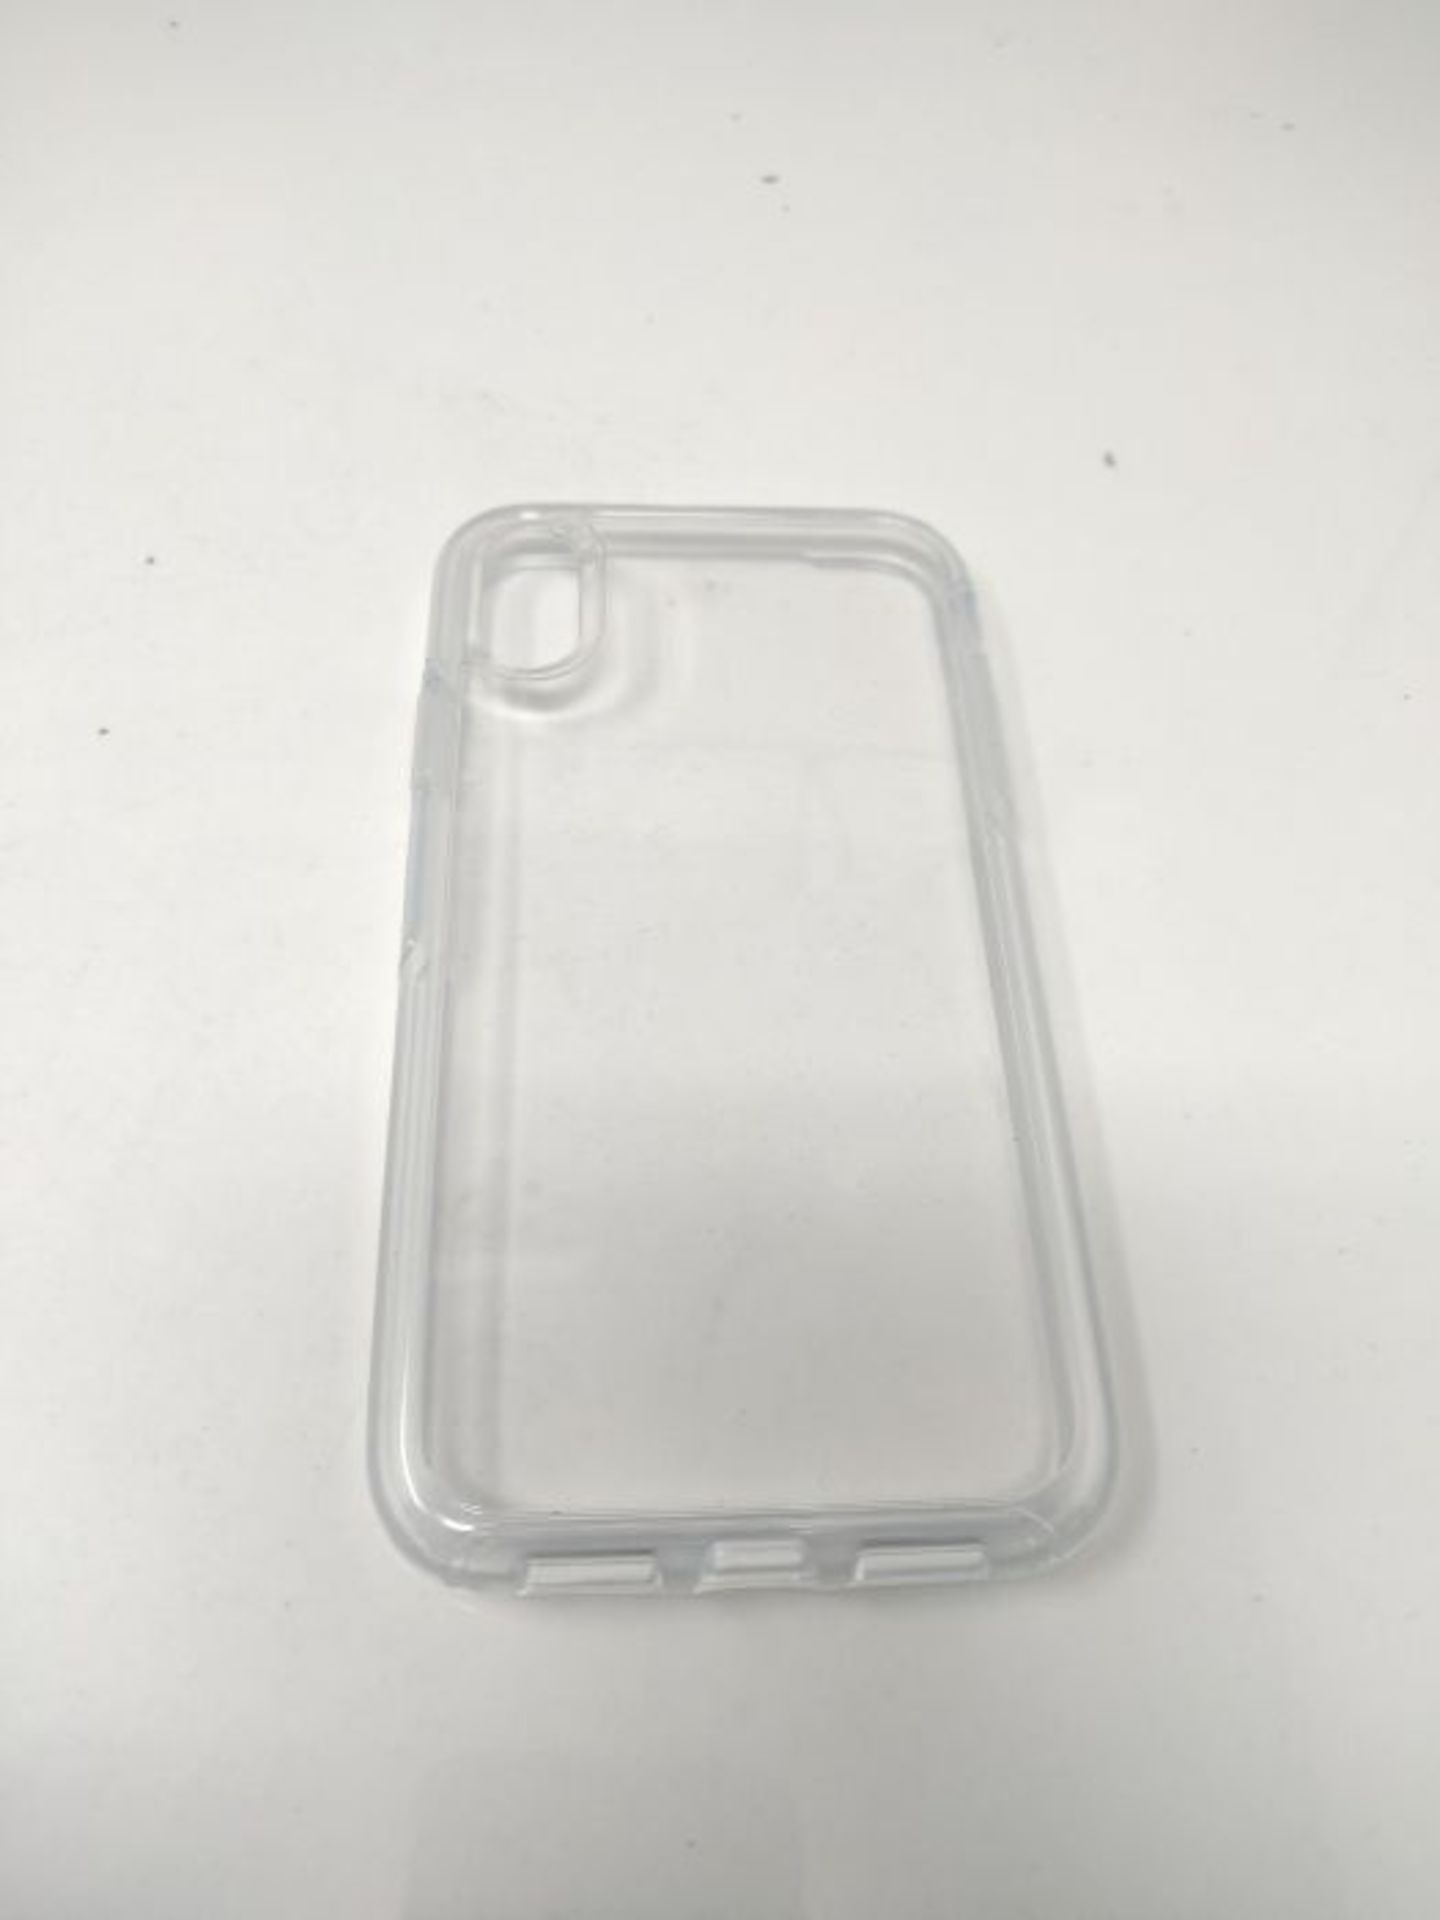 OtterBox (77-59900) SYMMETRY CLEAR SERIES, Clear Confidence for iPhone XR - CLEAR - Image 3 of 3